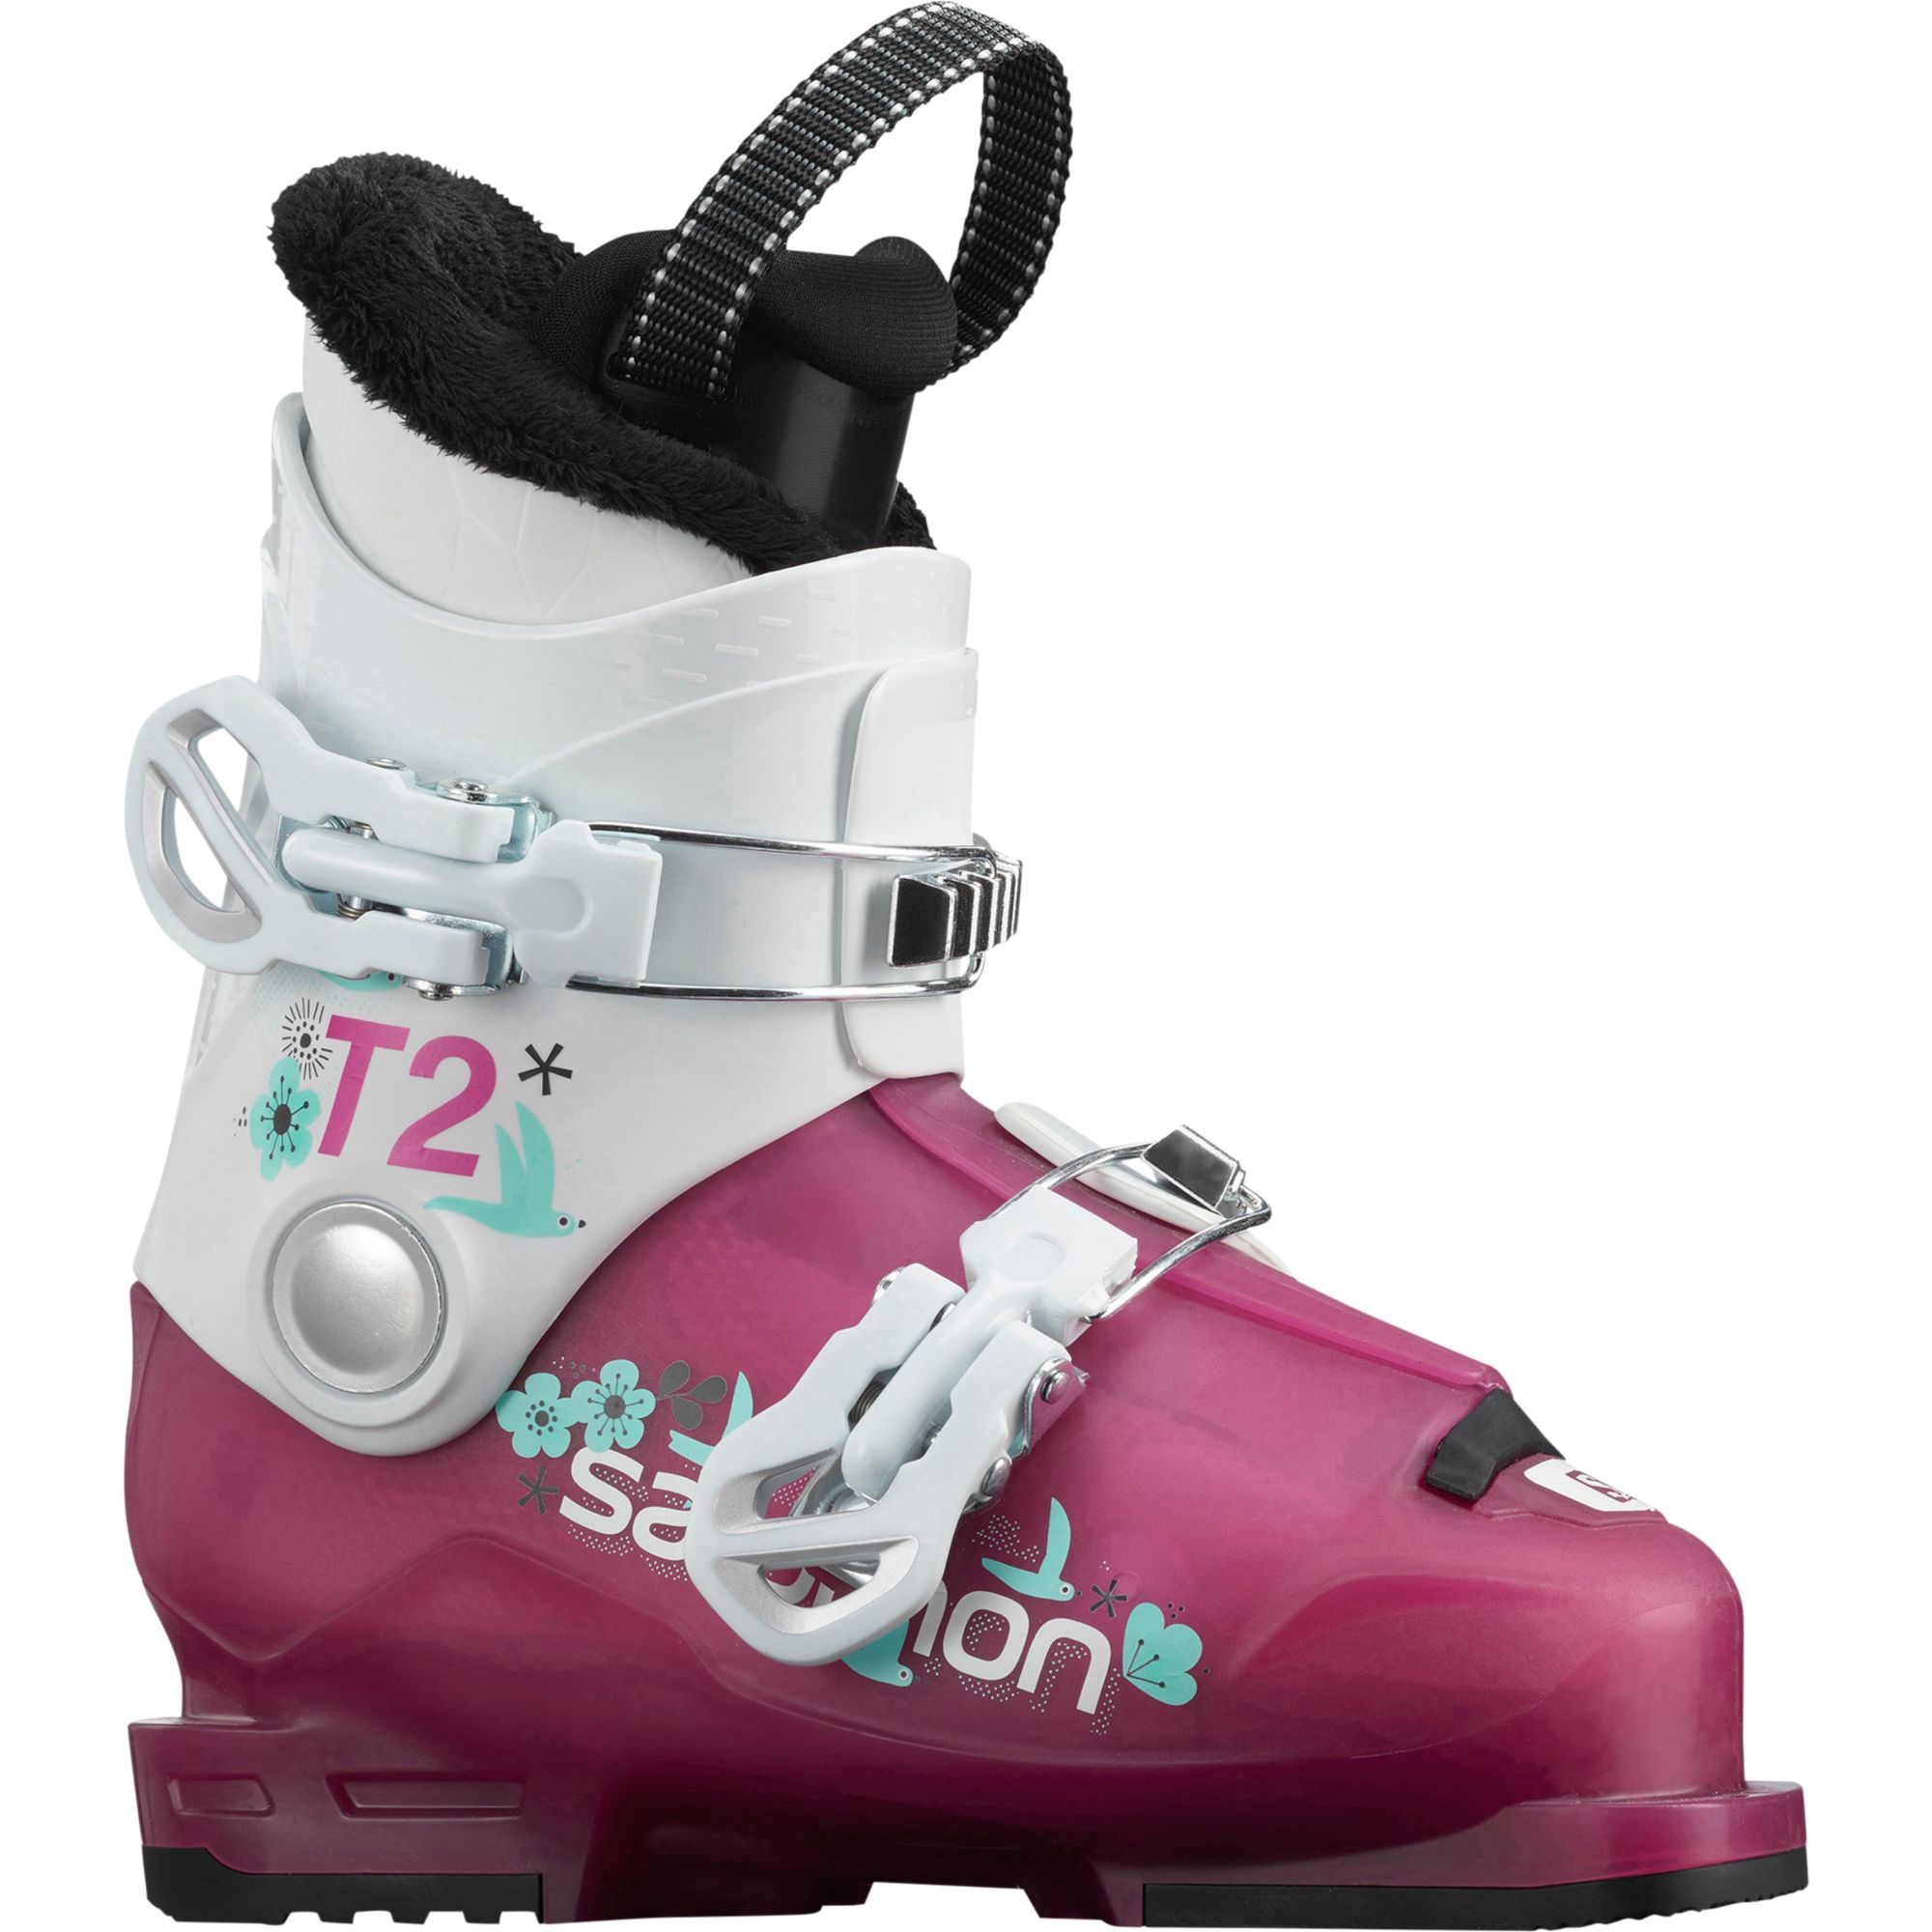 Girly RT T2 Boots imagine 2022